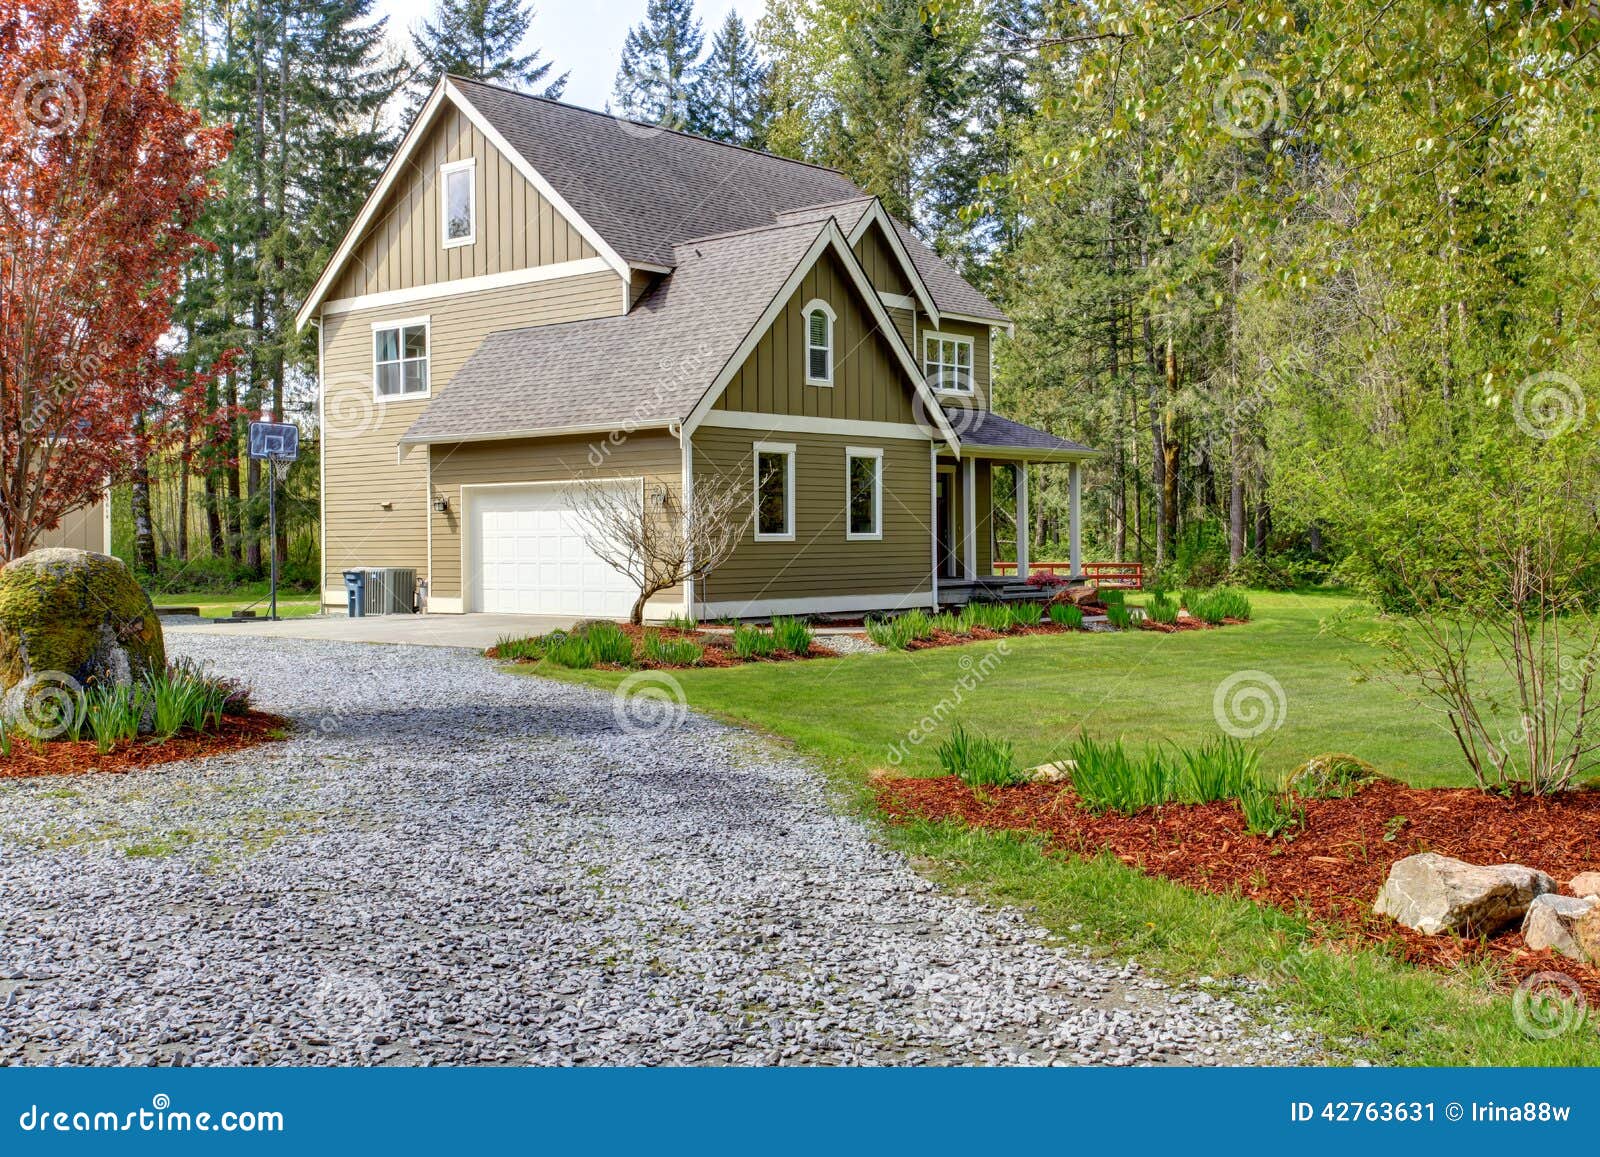 countryside house exterior. view of entrance and gravel driveway